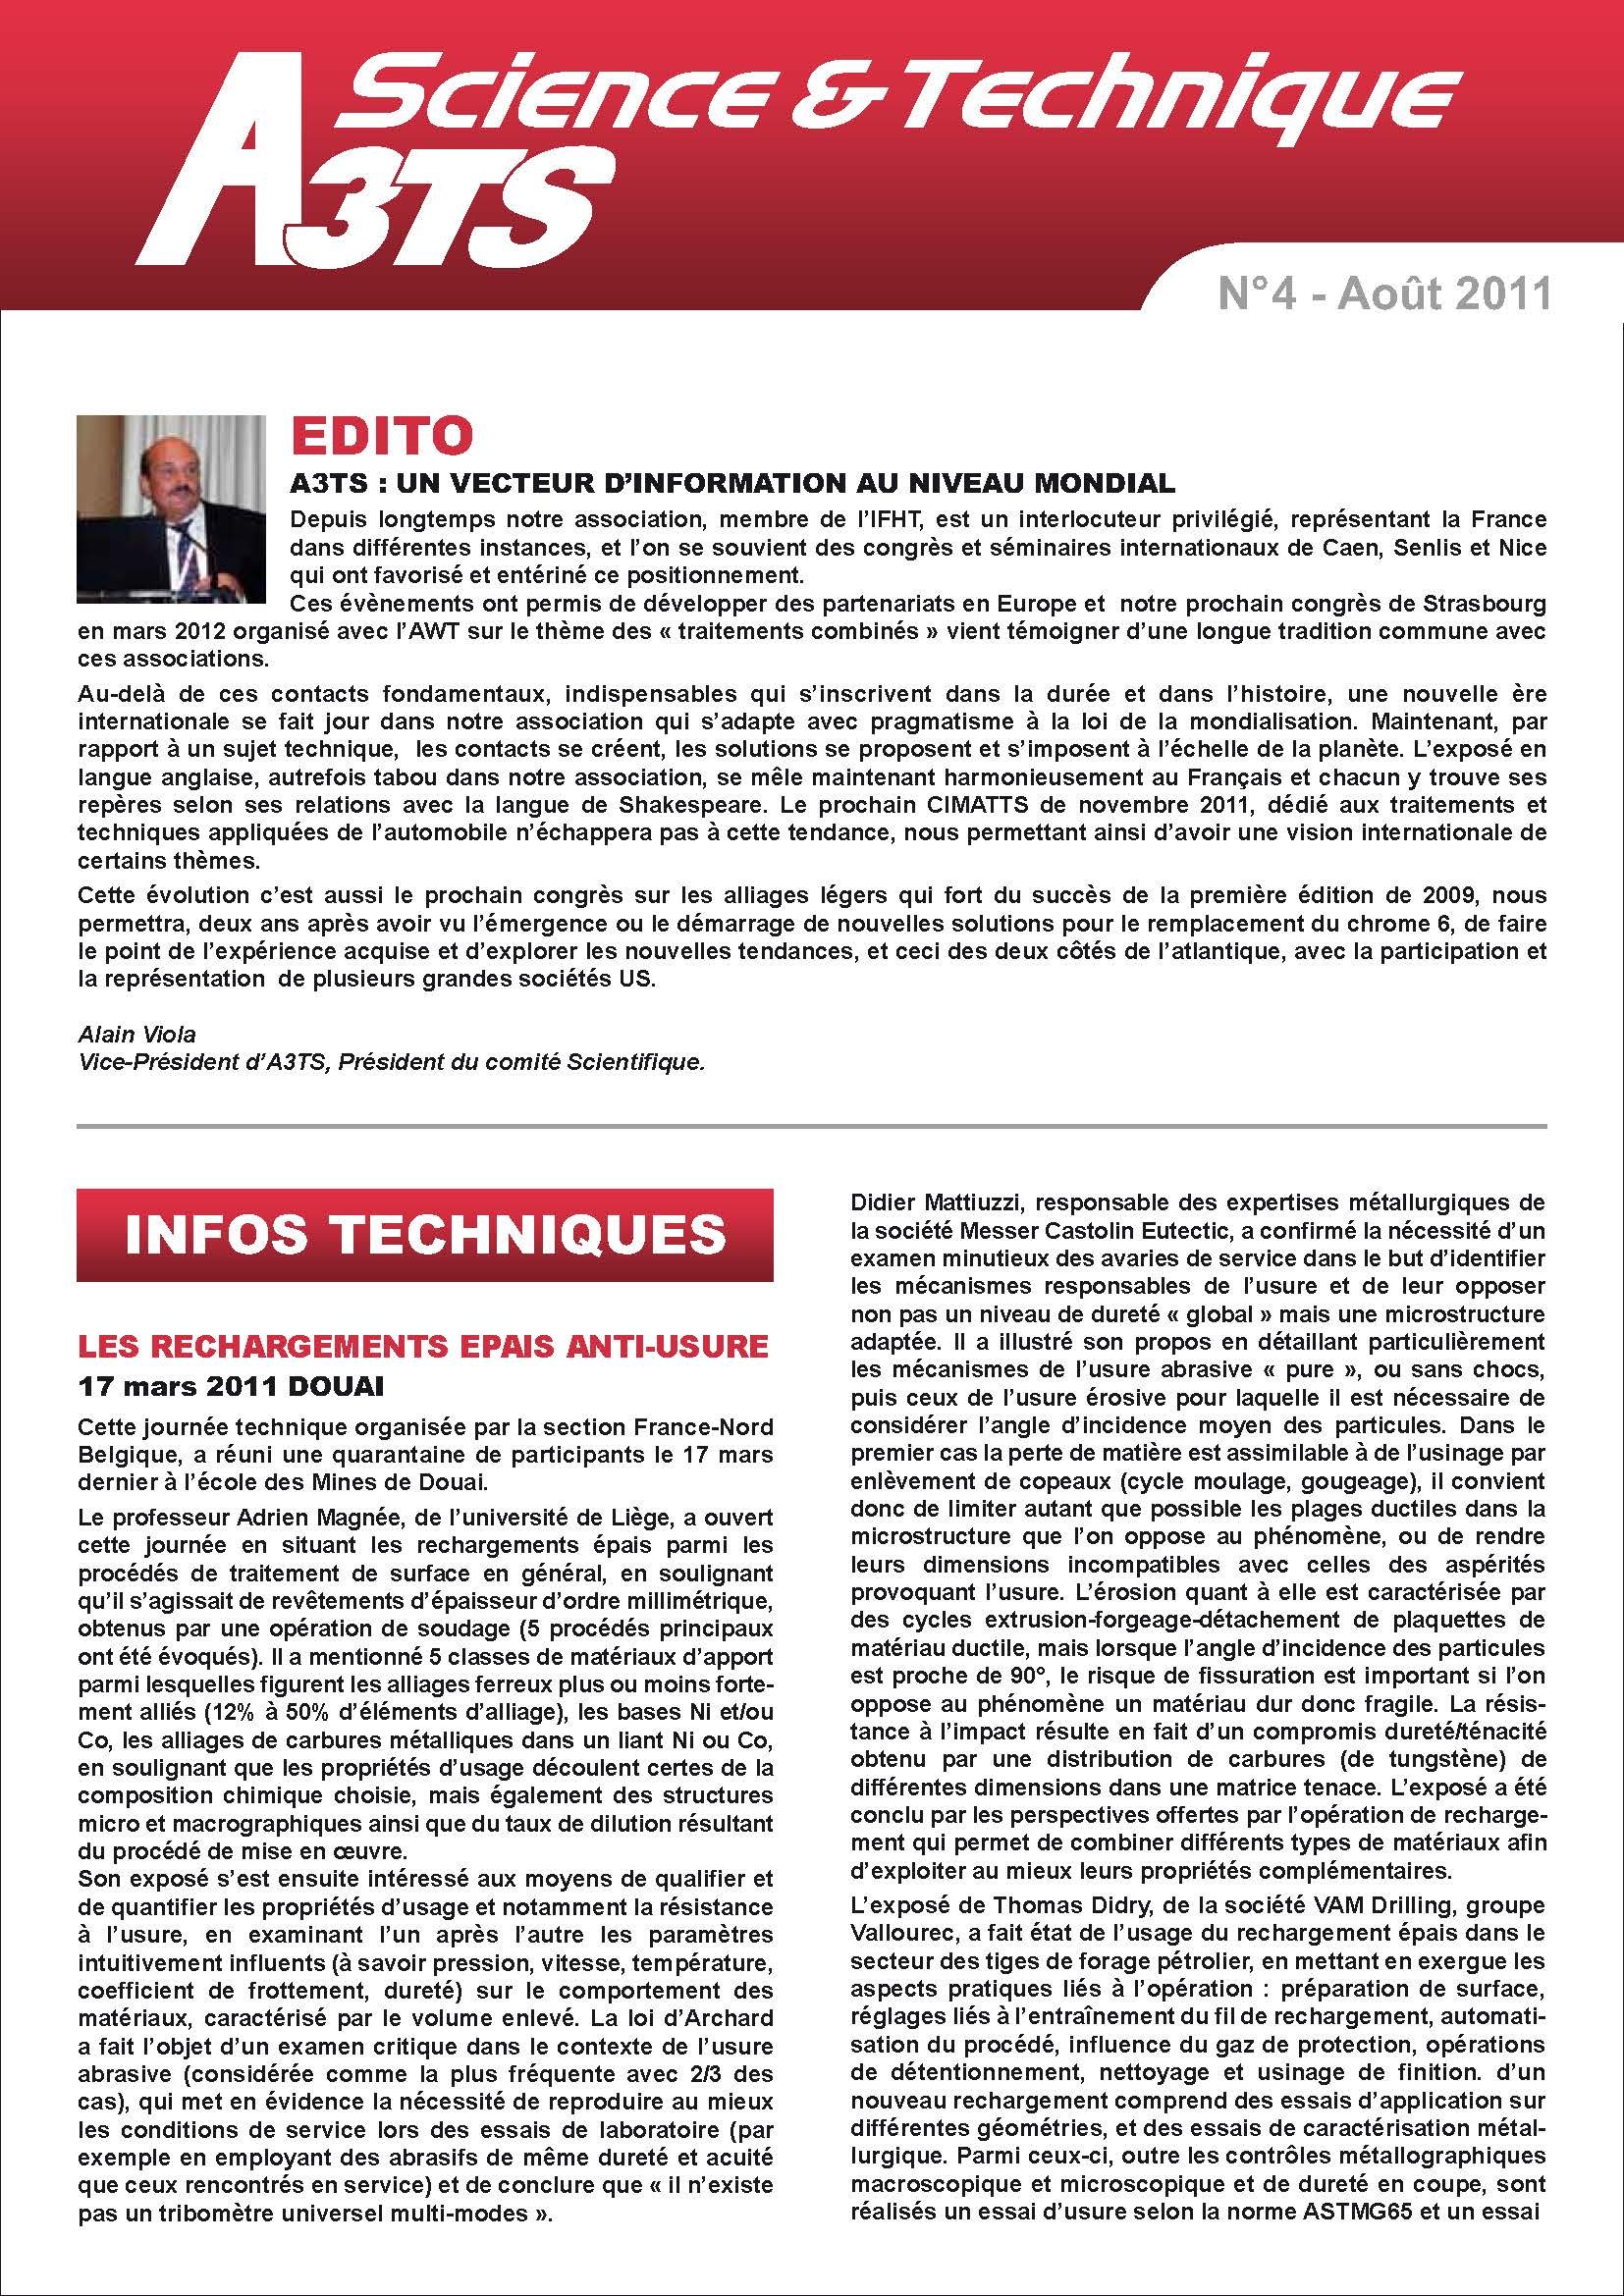 A3TS Science and Technique N°4 - August 2011